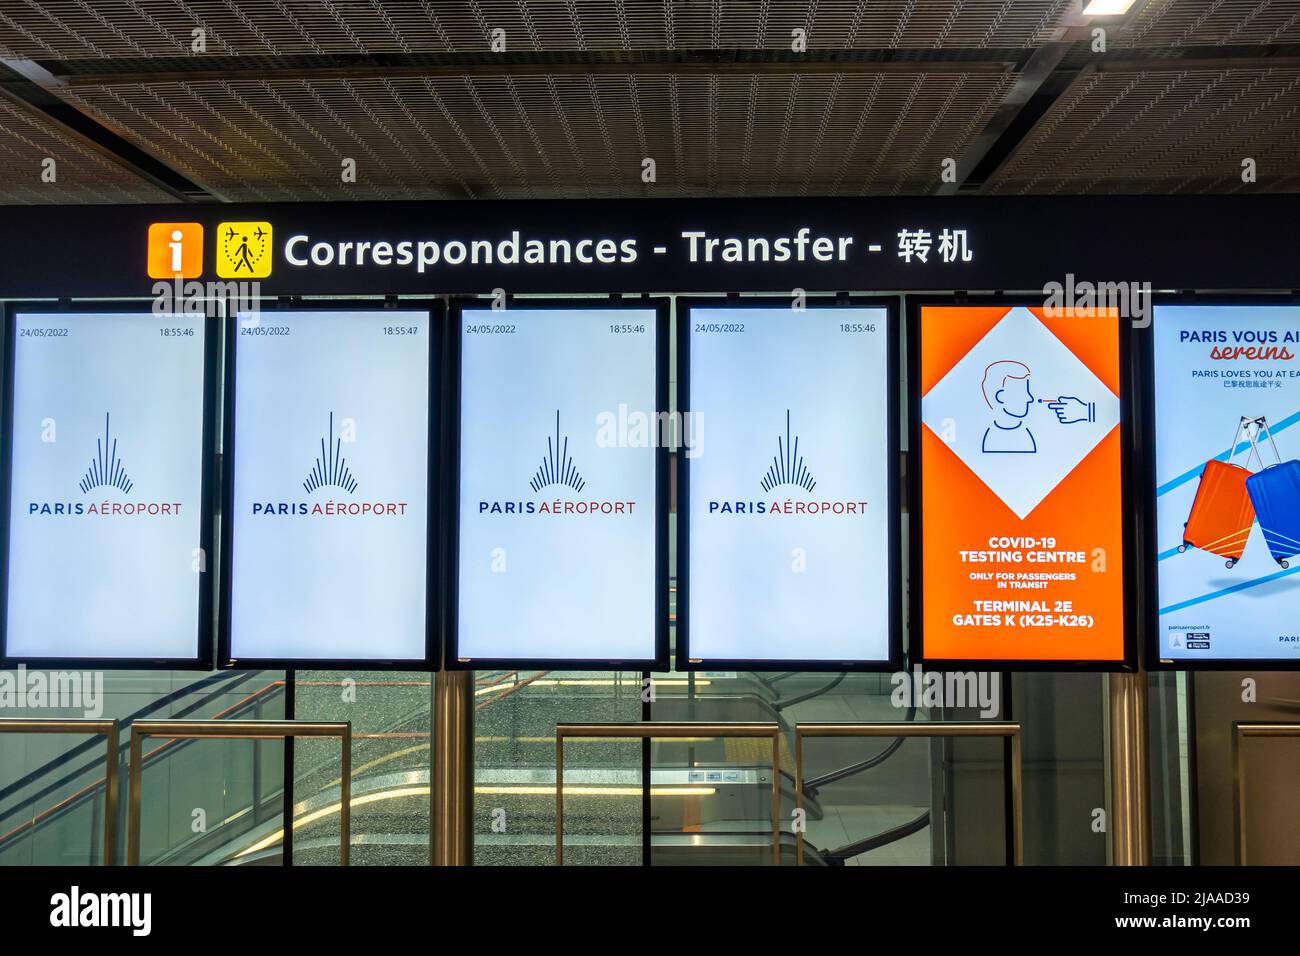 Paris Airport logos and info at Transfers - connected flights - in ...